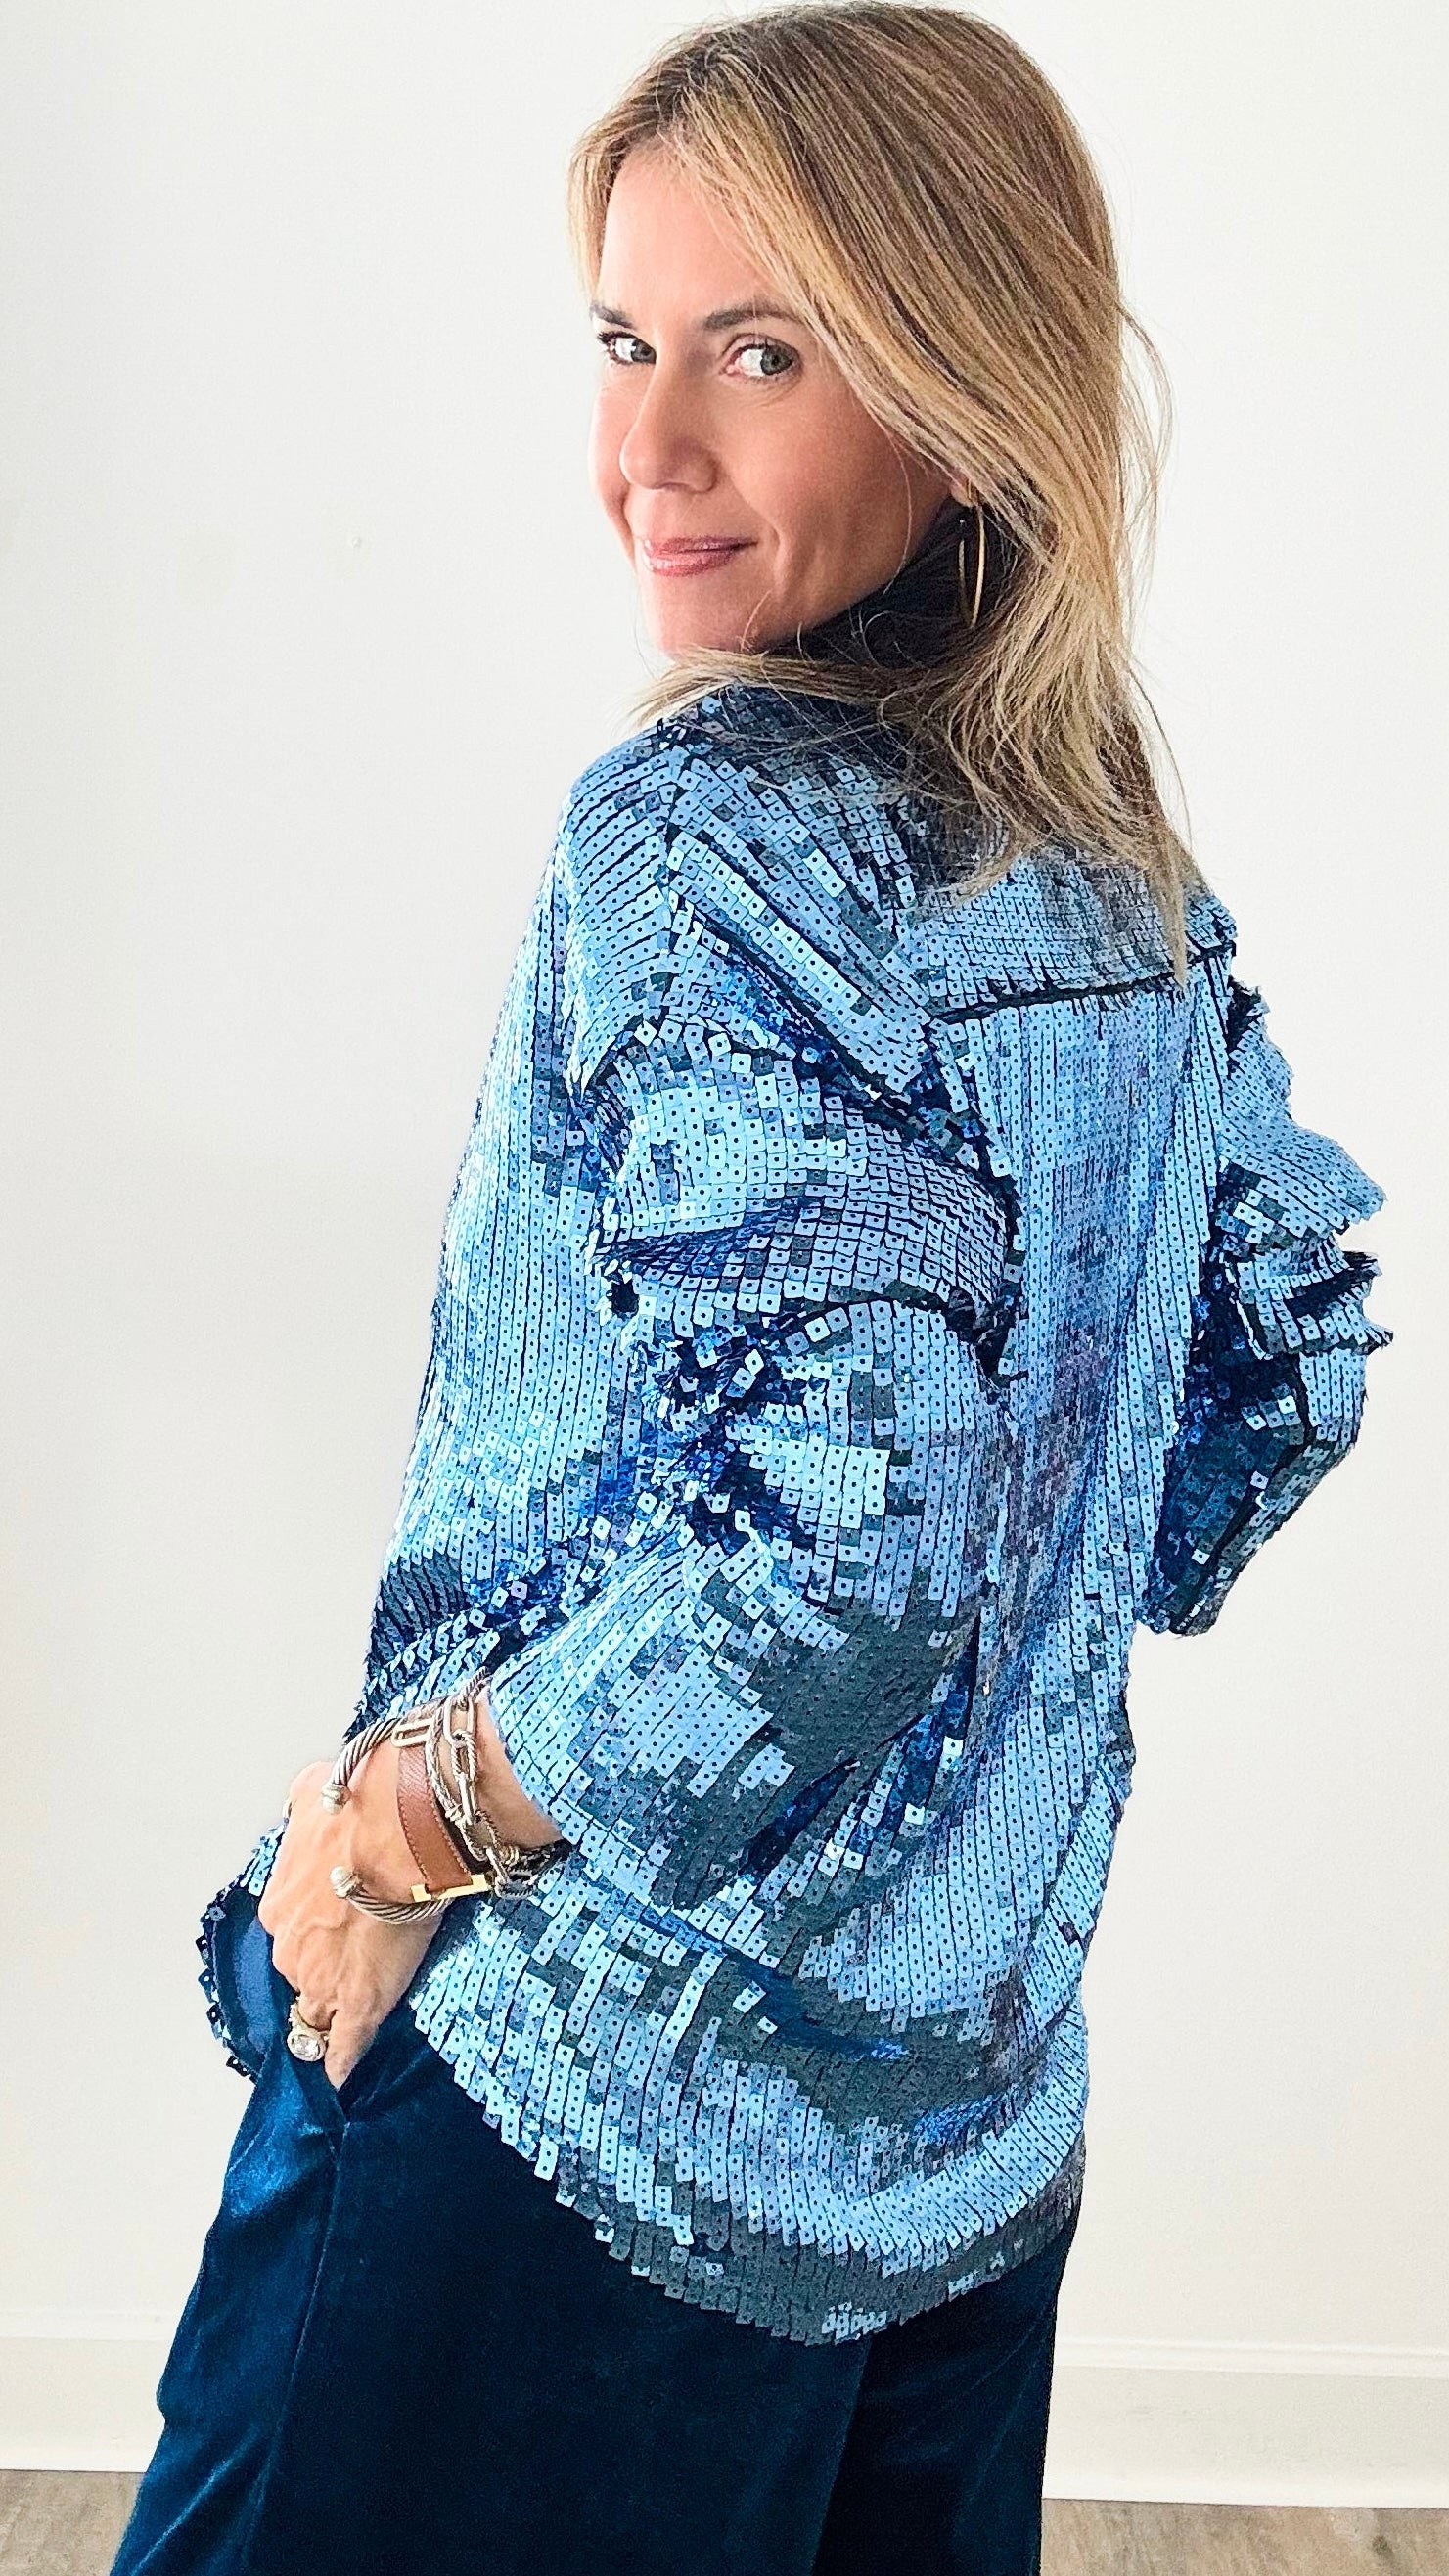 Meet You at Midnight Blue Sequin Blouse-130 Long Sleeve Tops-MAIN STRIP-Coastal Bloom Boutique, find the trendiest versions of the popular styles and looks Located in Indialantic, FL